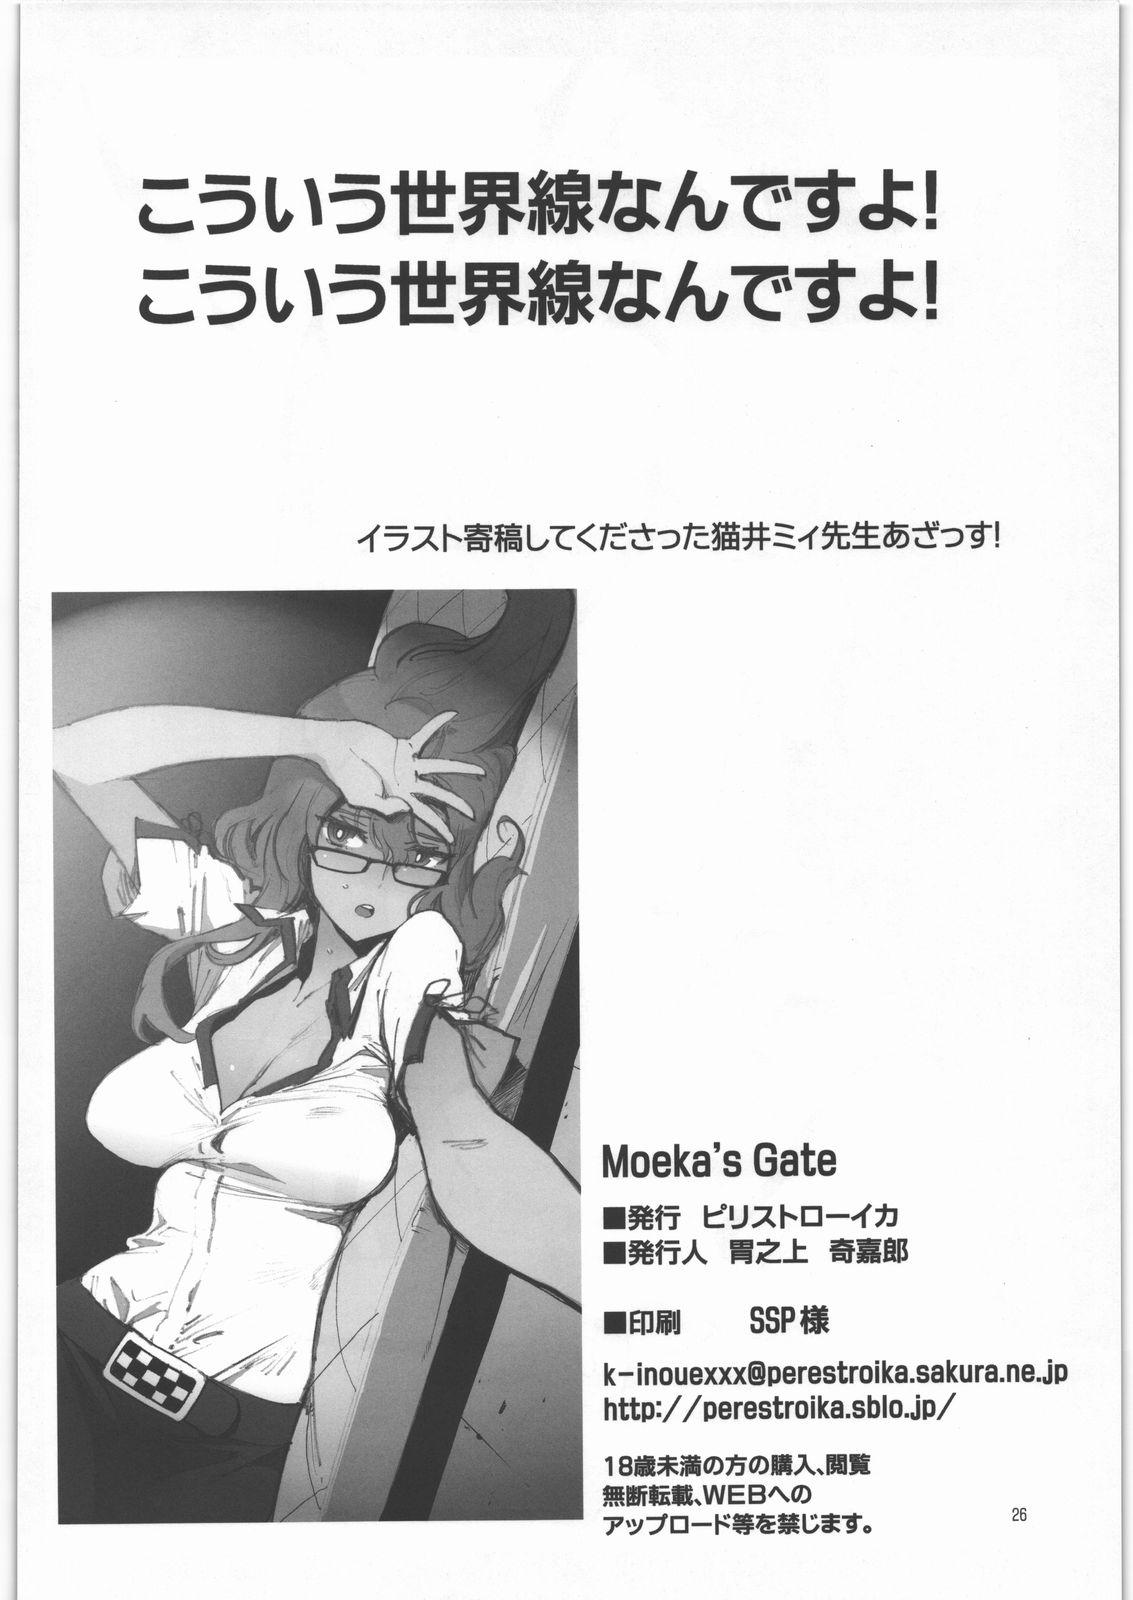 Best Blow Job Ever Moeka's Gate - Steinsgate Colombian - Page 25